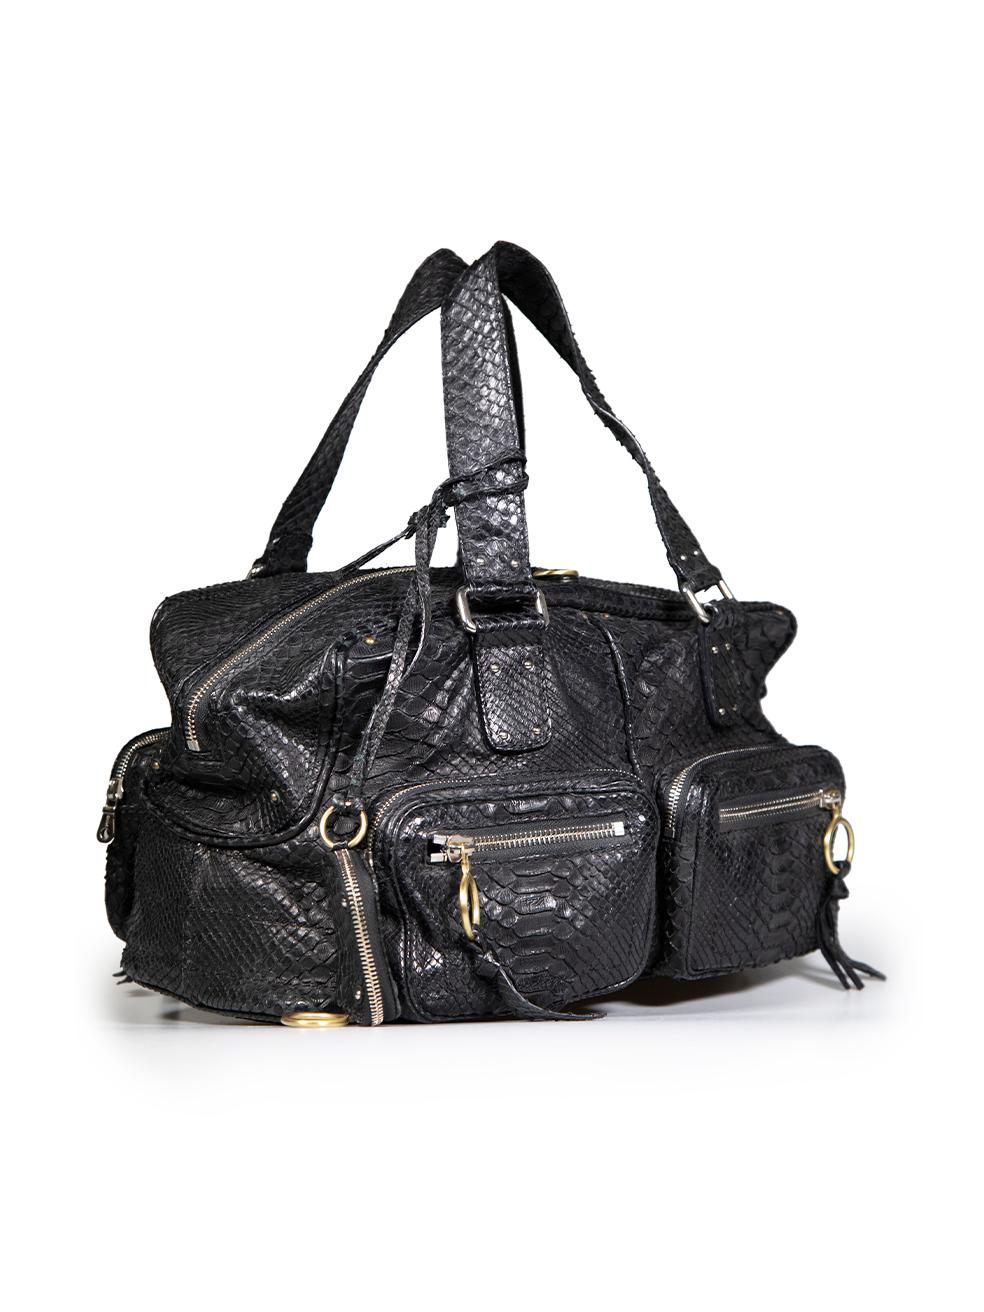 CONDITION is Very good. Minimal wear to bag is evident. Minimal wear to the exterior with curling of the snakeskin seen throughout. Some mild tarnishing is also seen on the hardware detailing and the leather zipper tassels have split on this used